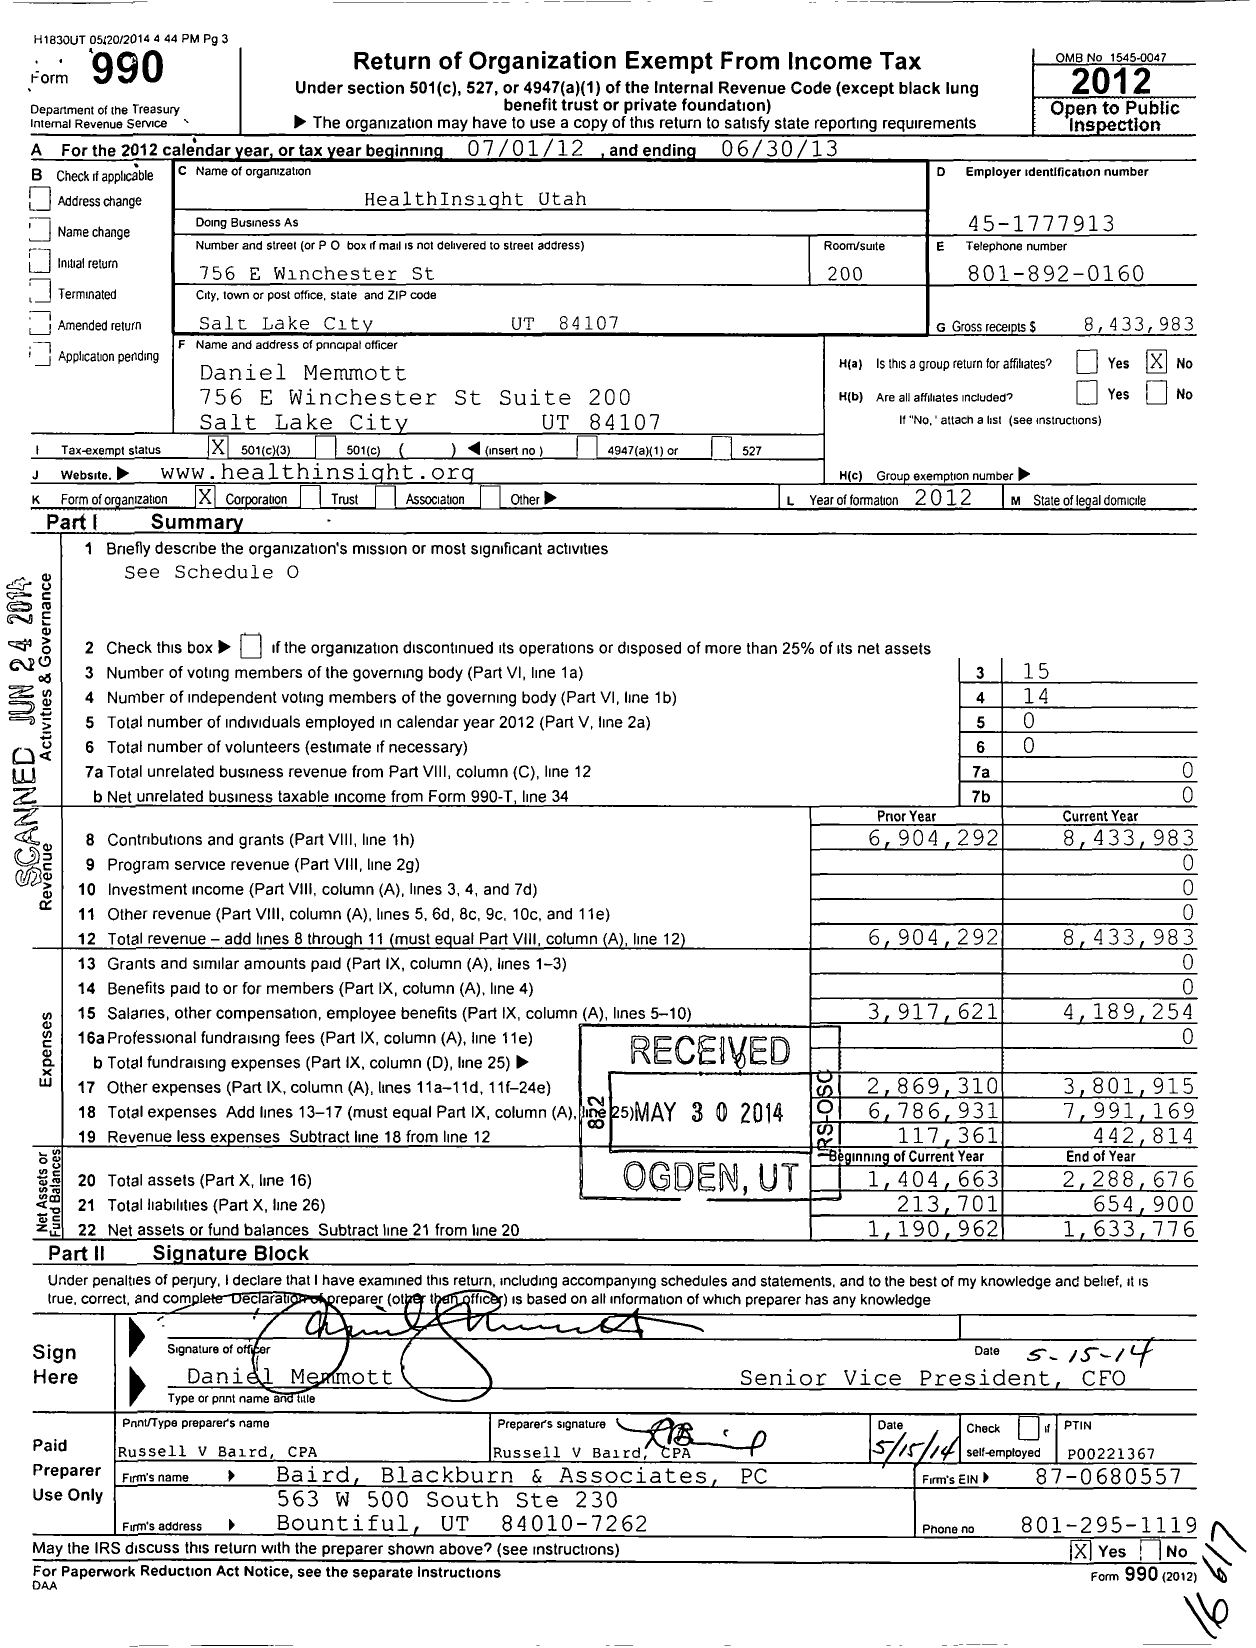 Image of first page of 2012 Form 990 for Healthinsight Utah